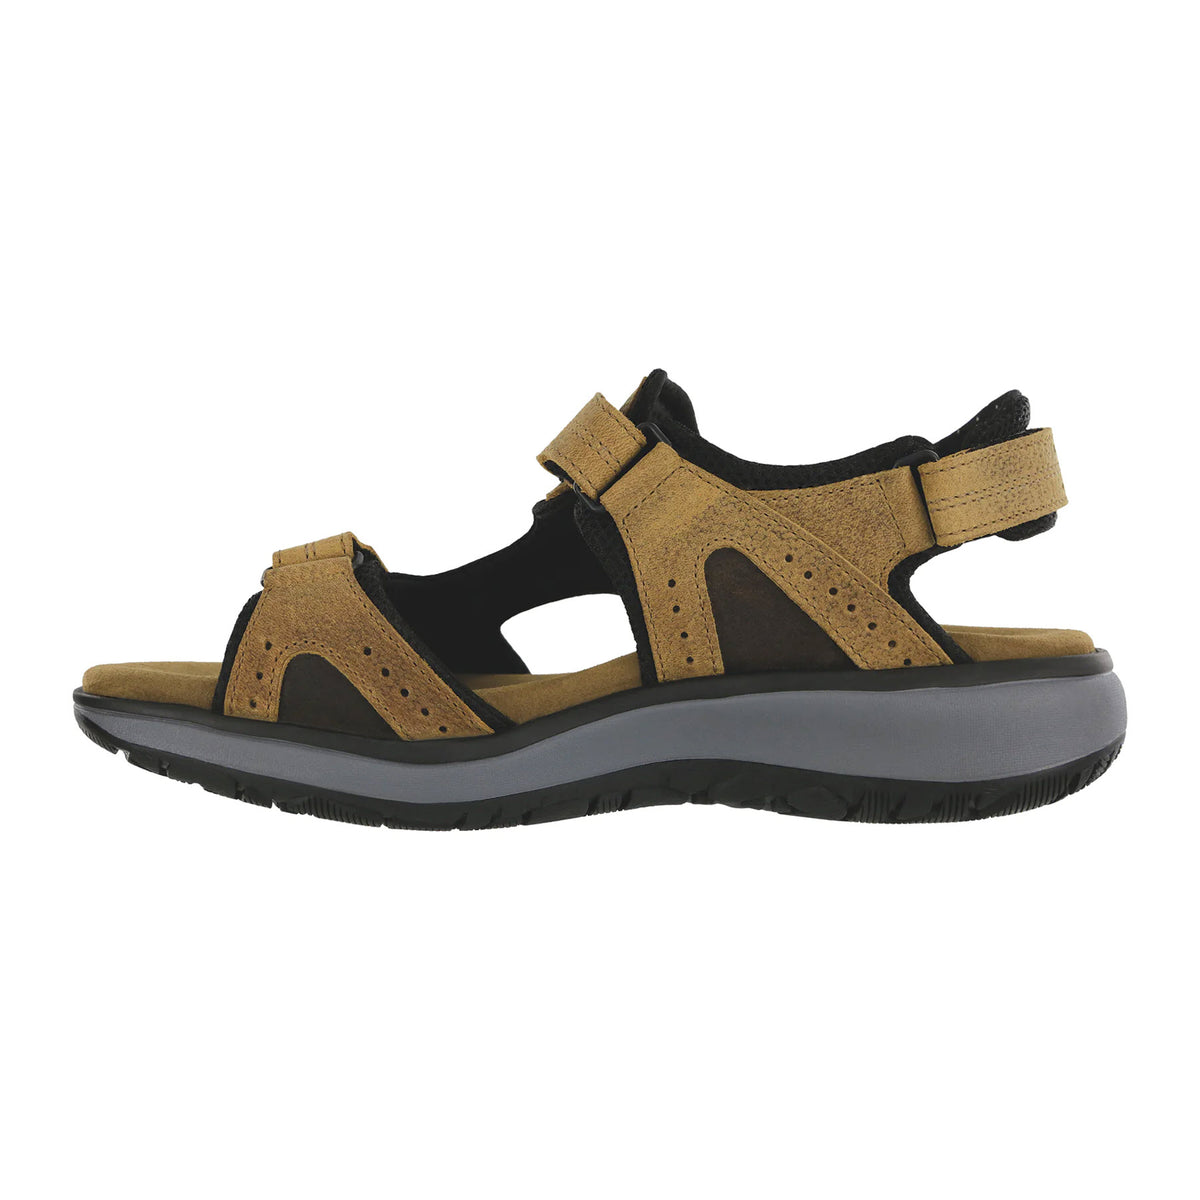 Side view of a brown and black SAS MAVERICK SANDAL STAMPEDE SAND - MENS by SAS with adjustable straps, cushioned insole, and a thick sole.